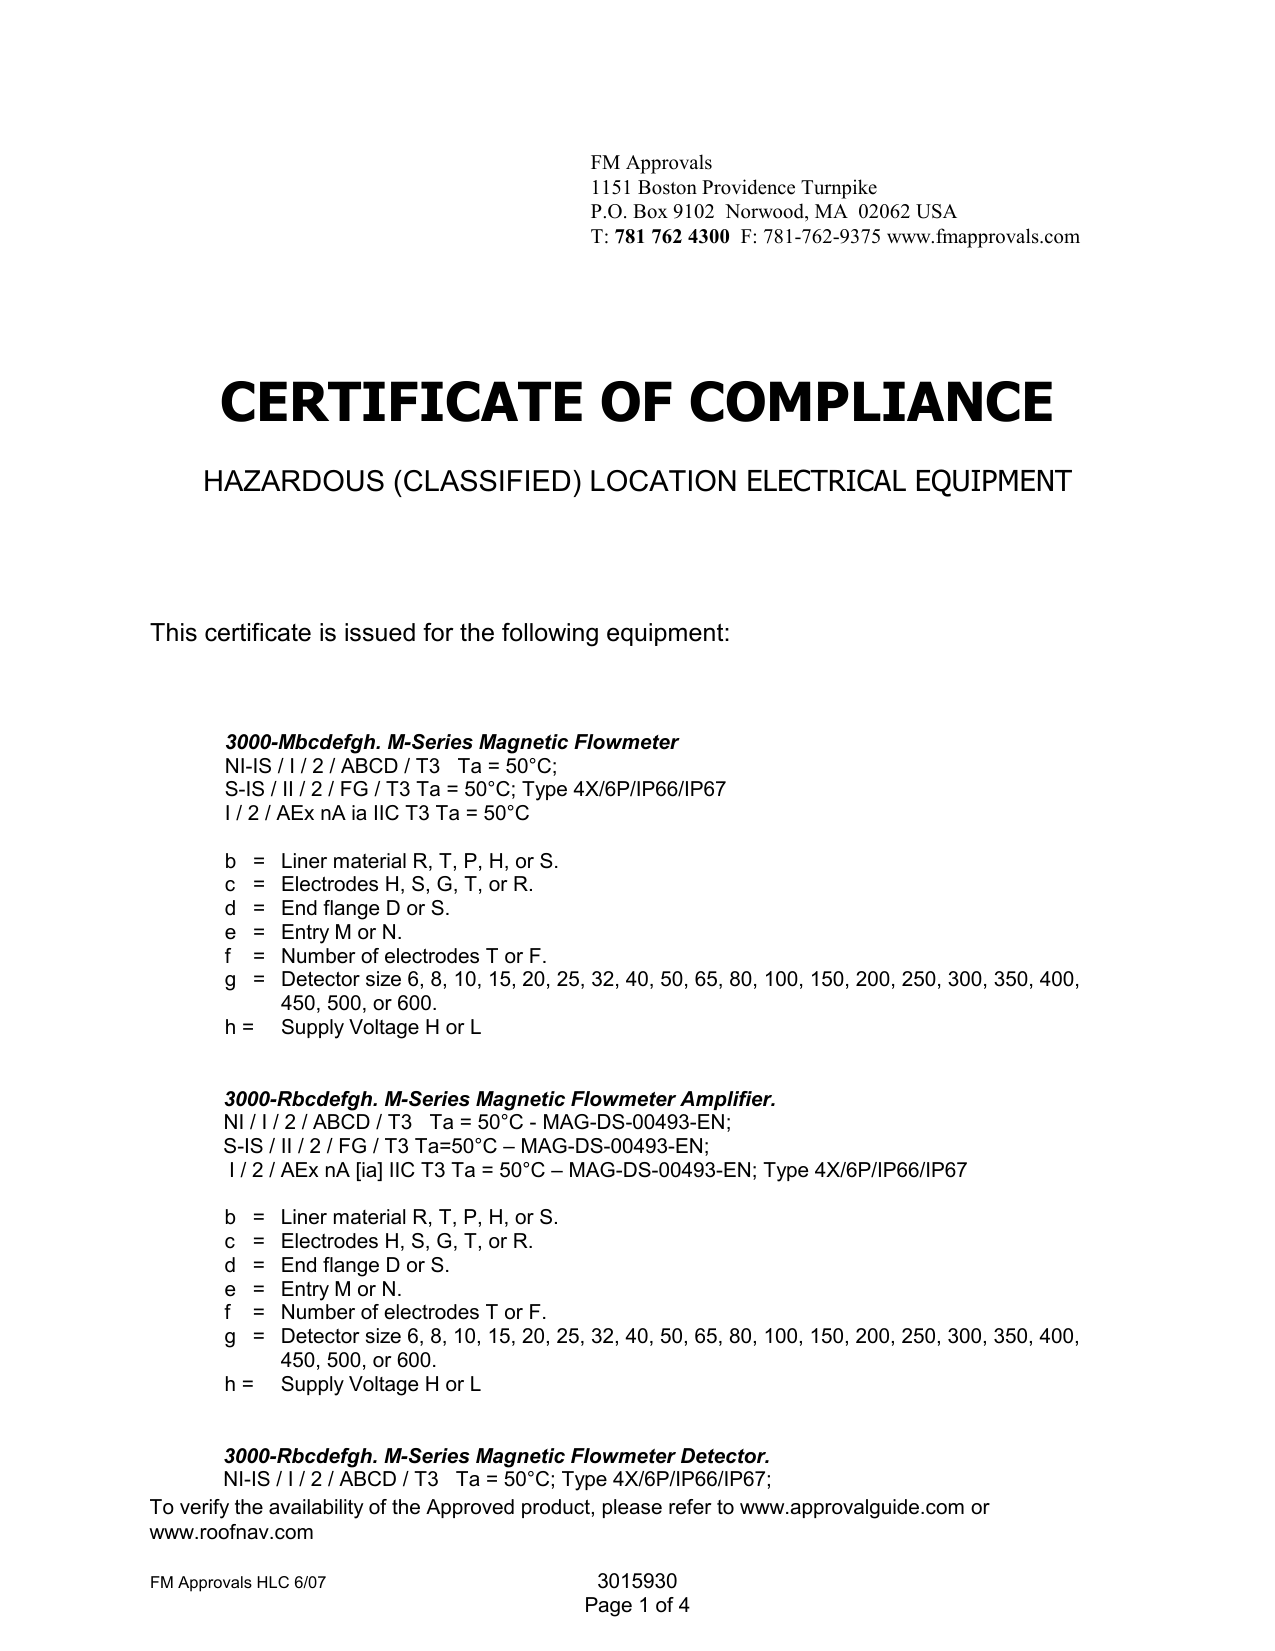 Certificate Of Compliance Formerly Known As An Equipment Use Permit